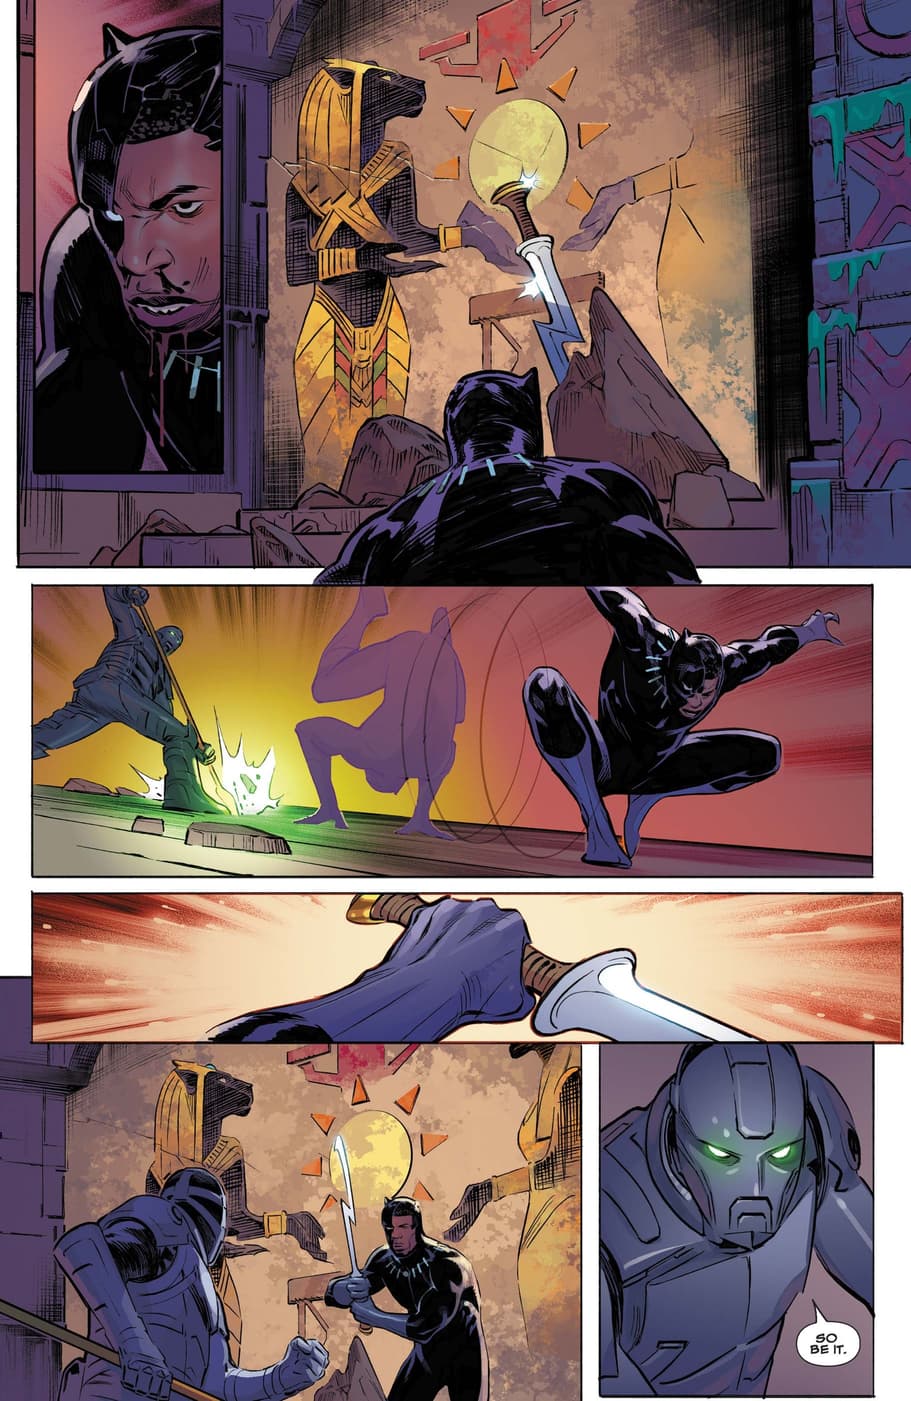 Preview page from BLACK PANTHER: UNCONQUERED (2022) #1 by Bryan Edward Hill, Alberto Duarte, and Matt Milla.